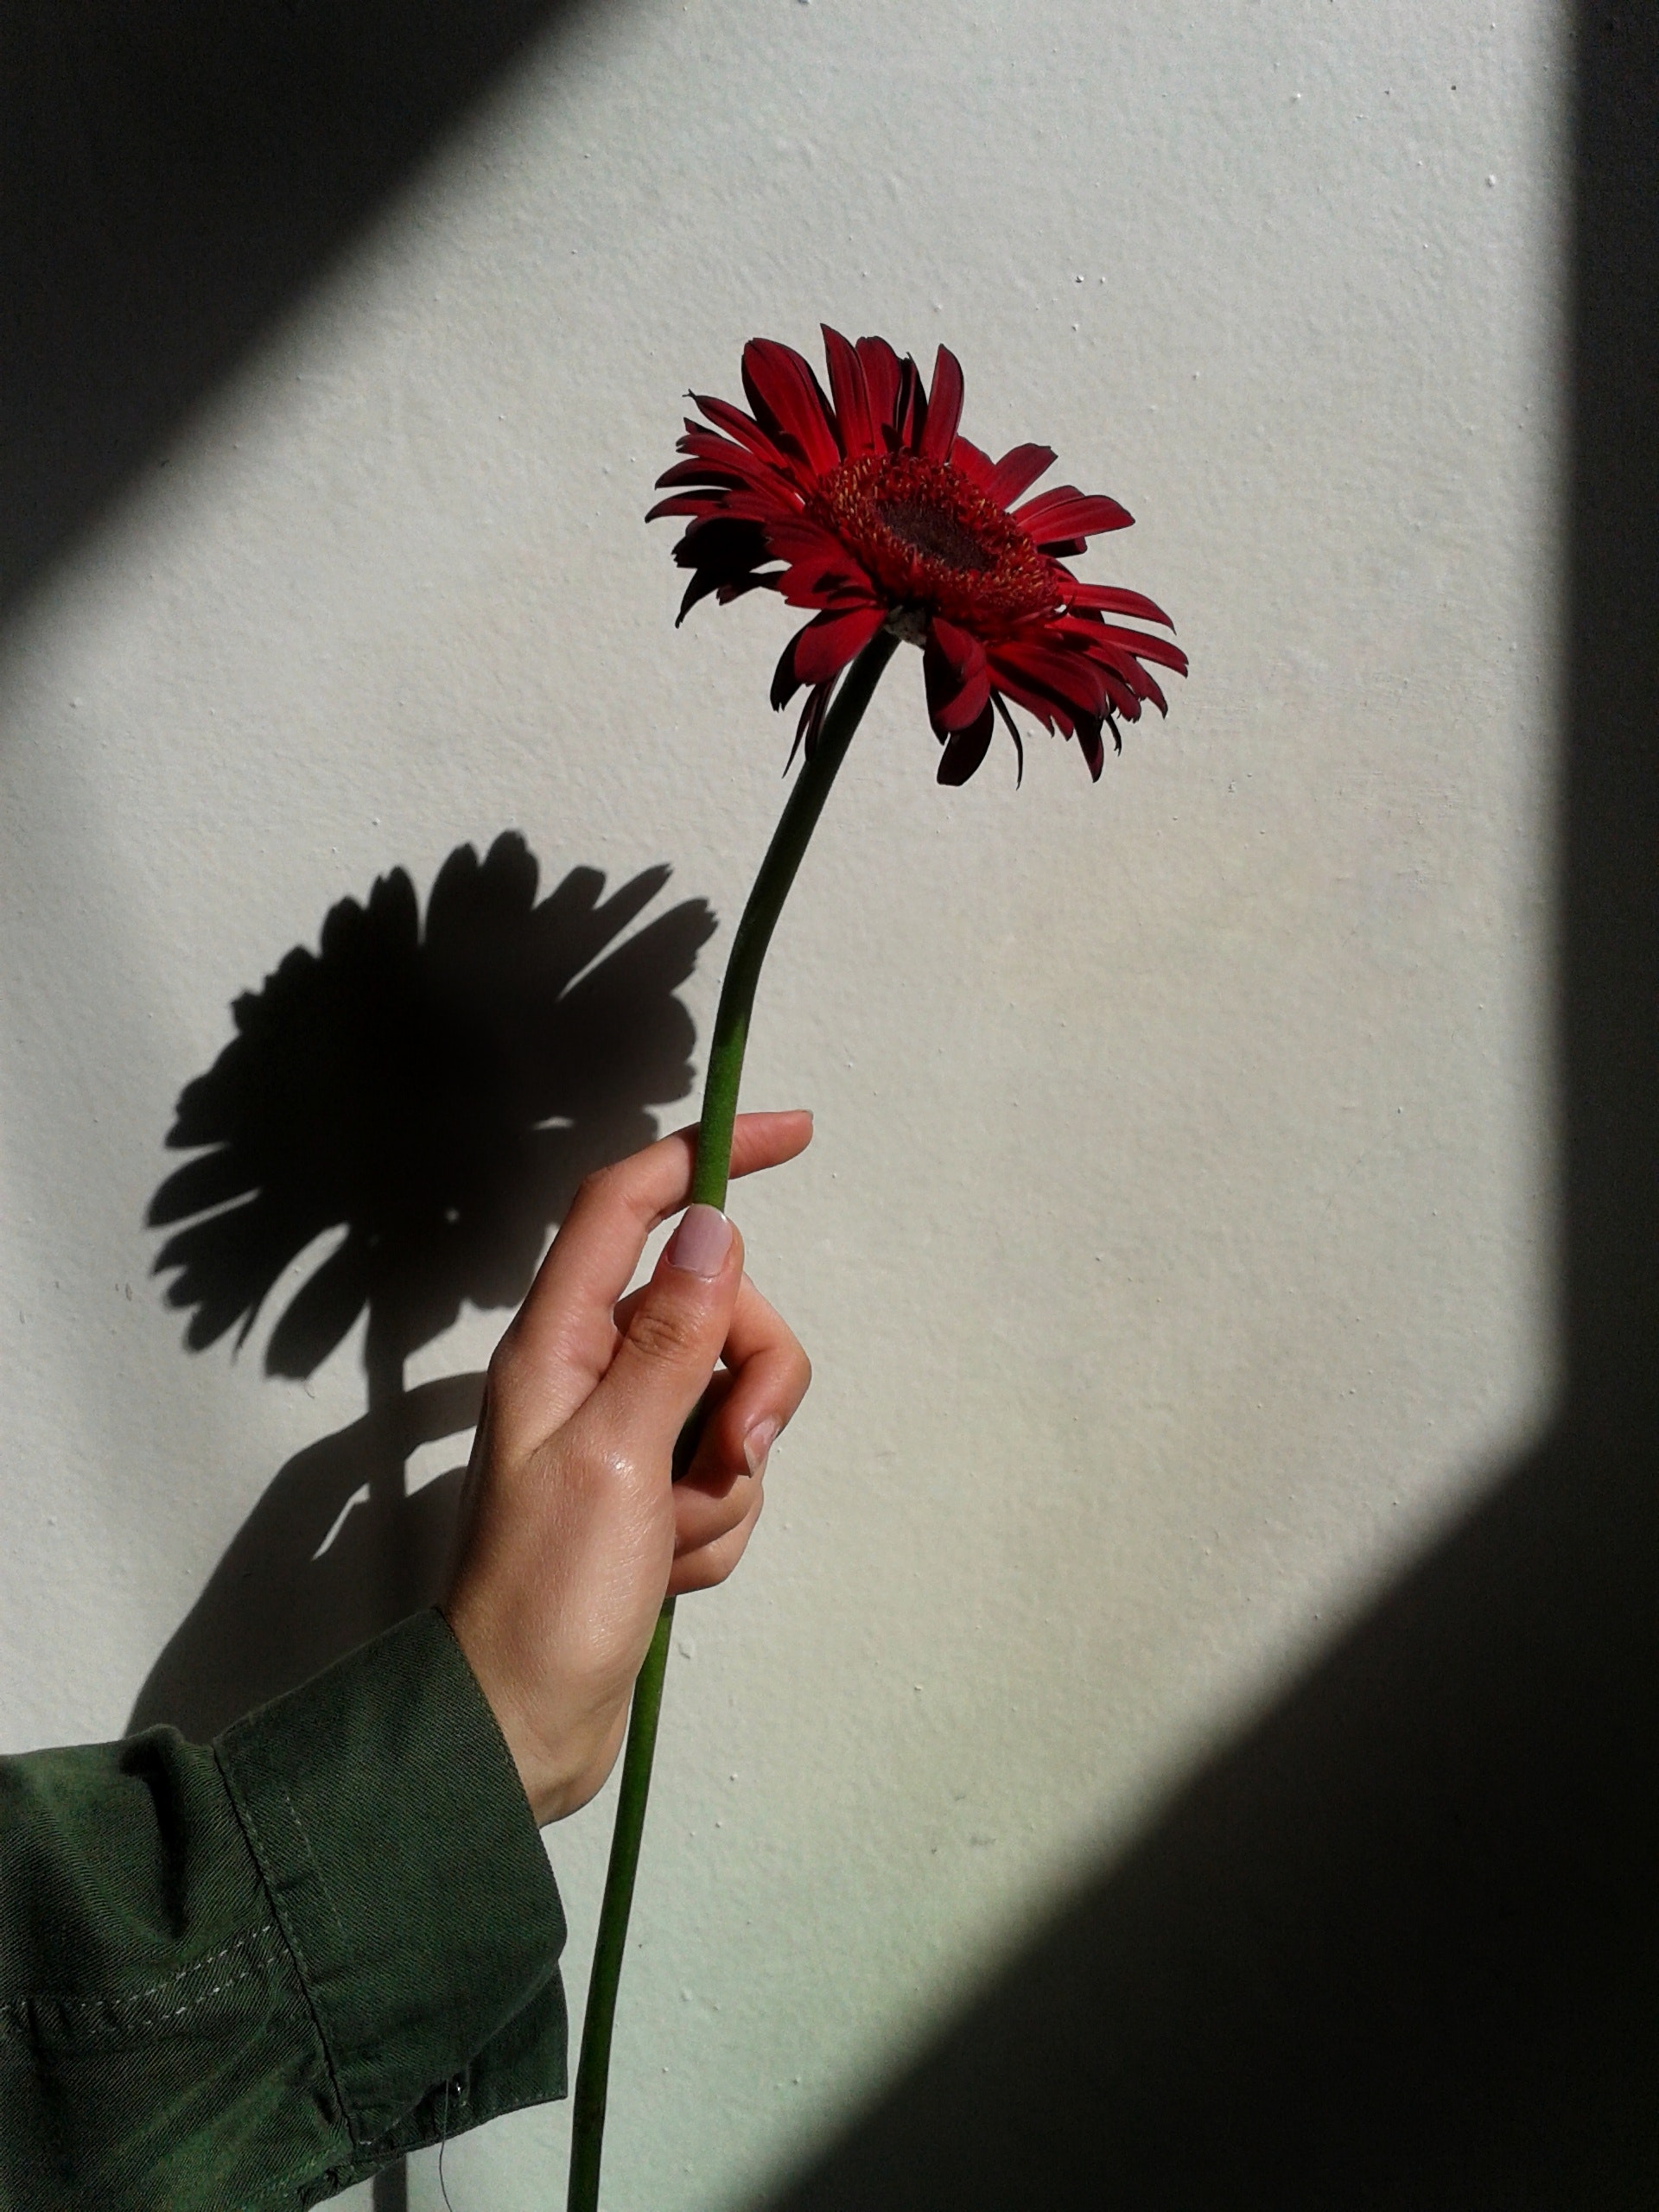 Person Holding A Flower - HD Wallpaper 